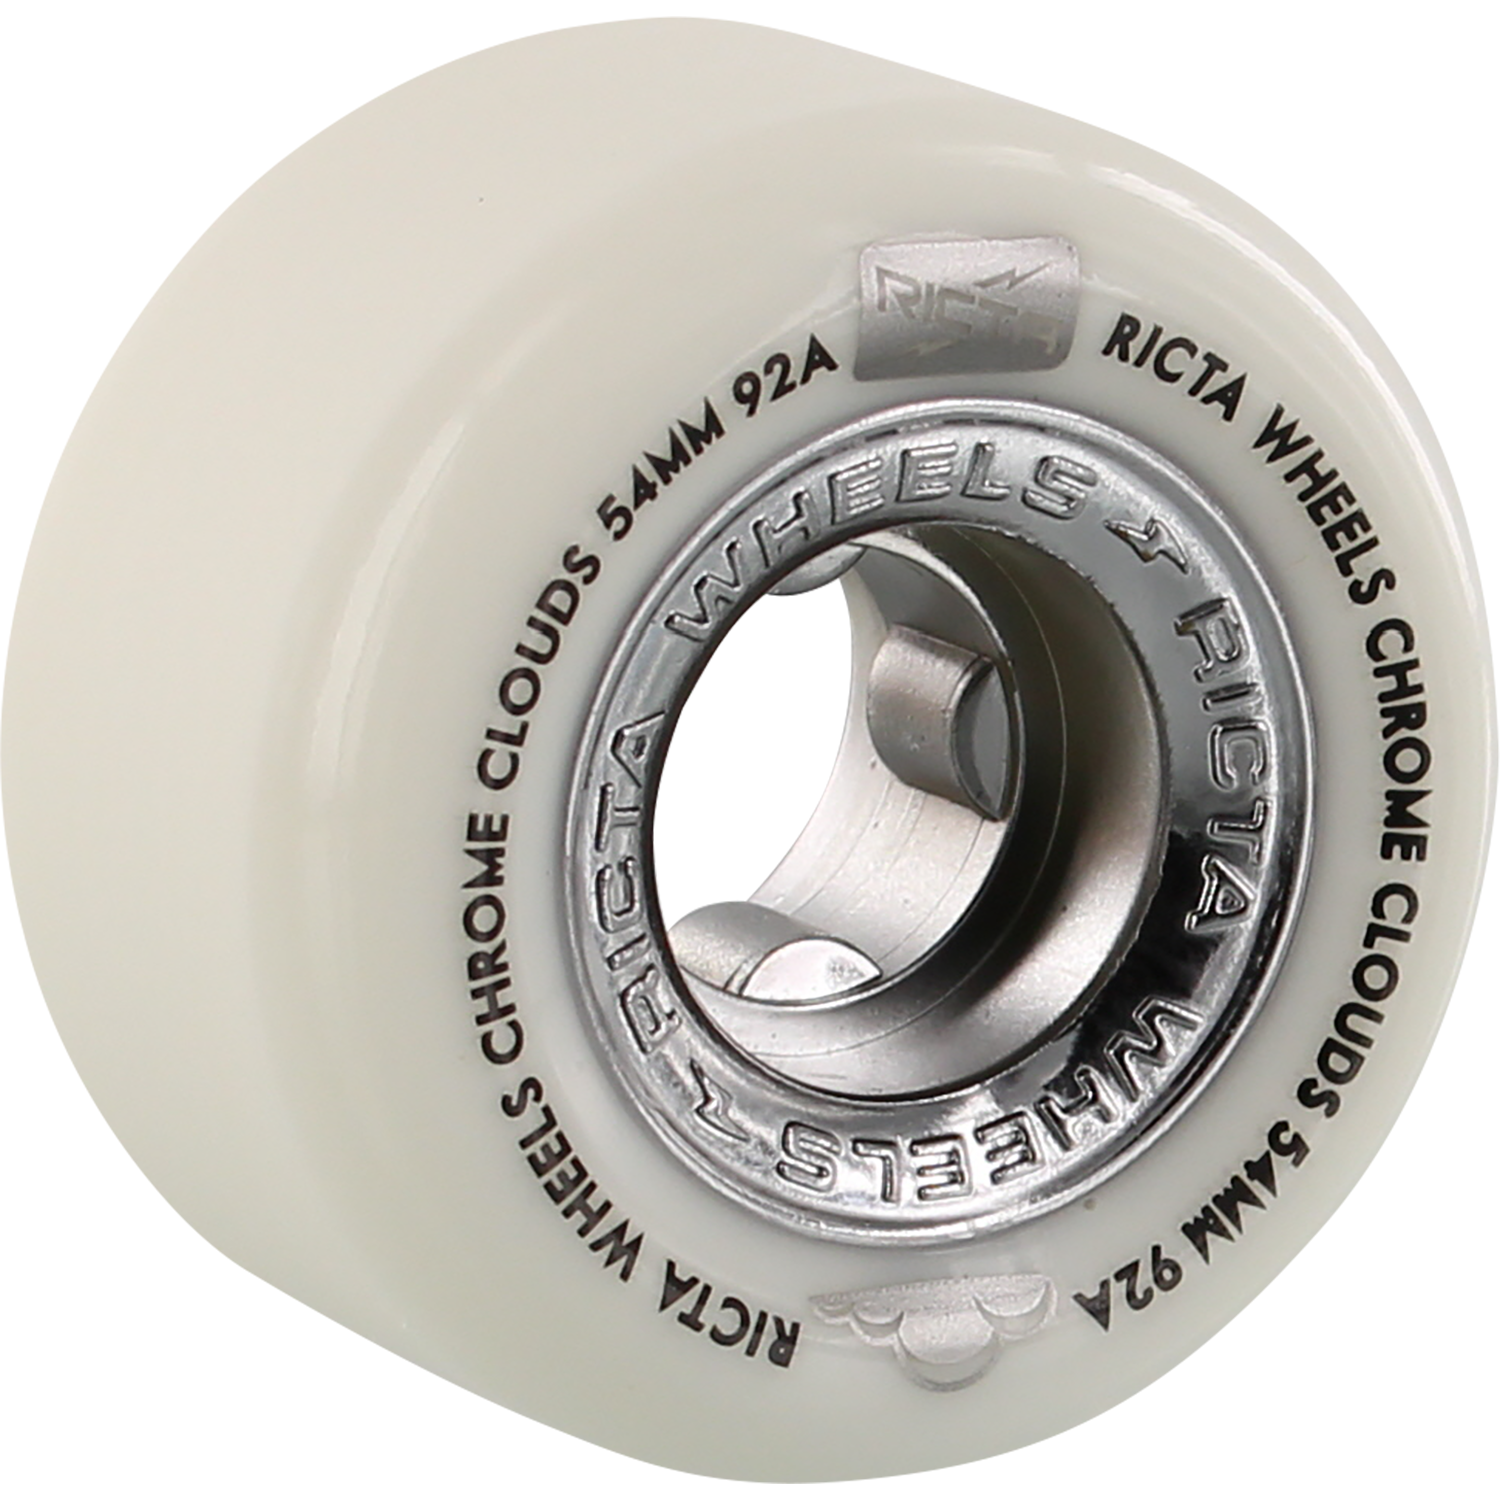 Ricta Chrome Clouds 54mm 92a White and Black - Invisible Board Shop